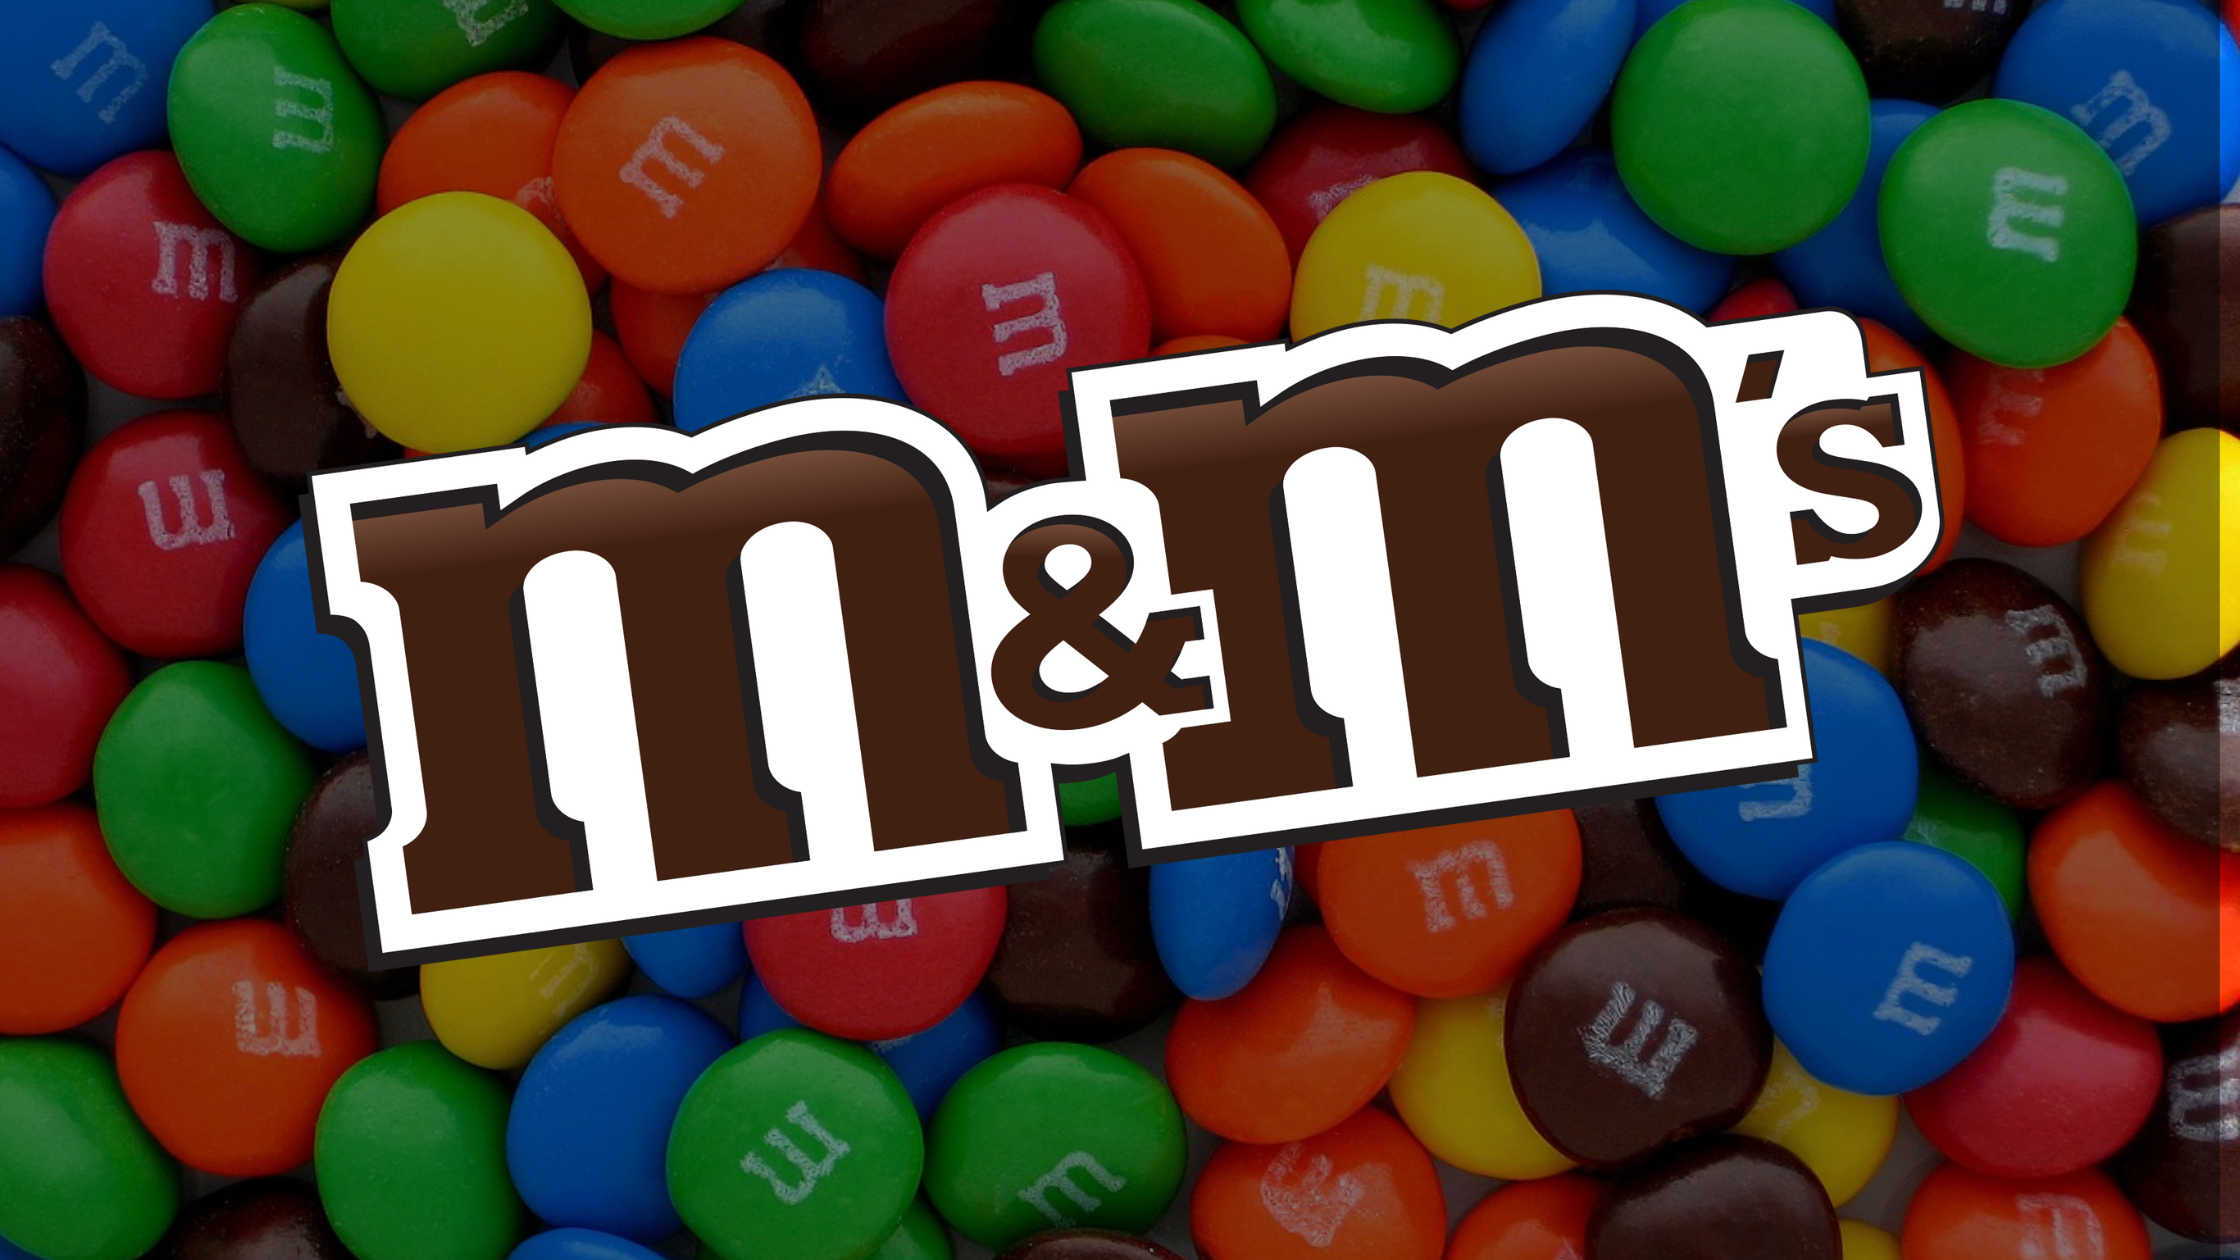 M&M's Is Launching 3 New Flavors 